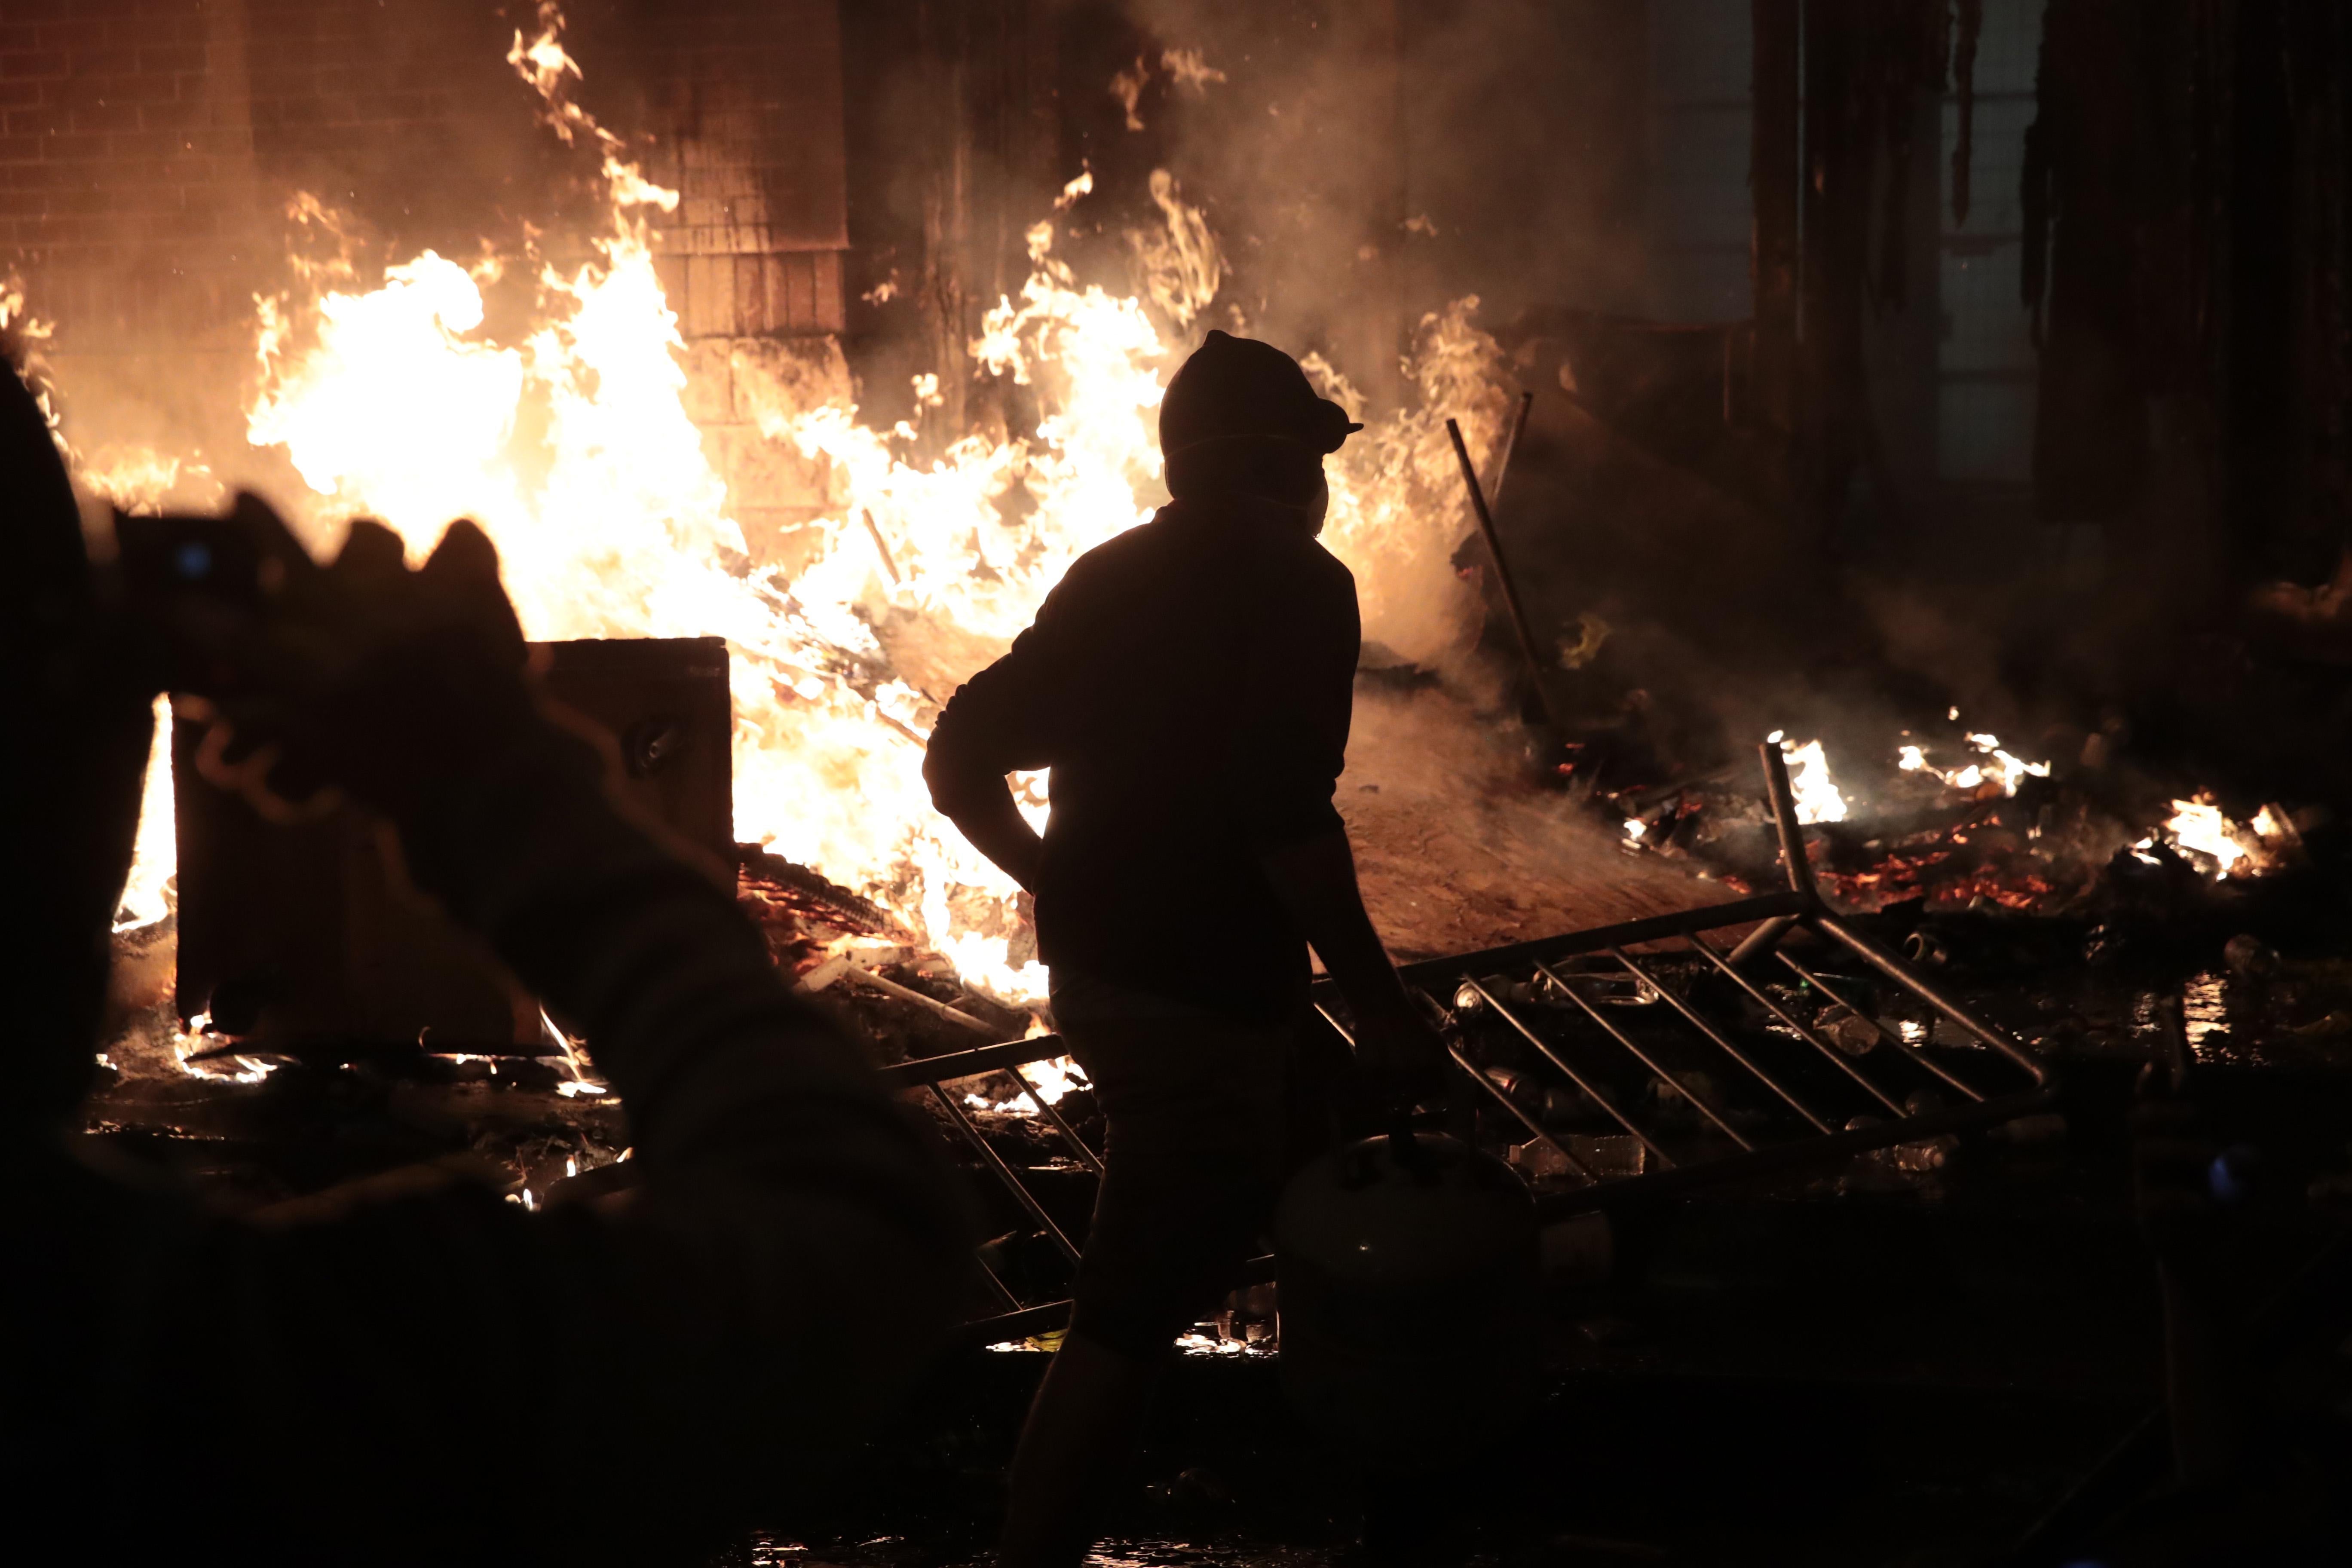 A silhouetted protester stands in front of bright flames while another person films them and a fallen metal crowd barrier reflects the light. 